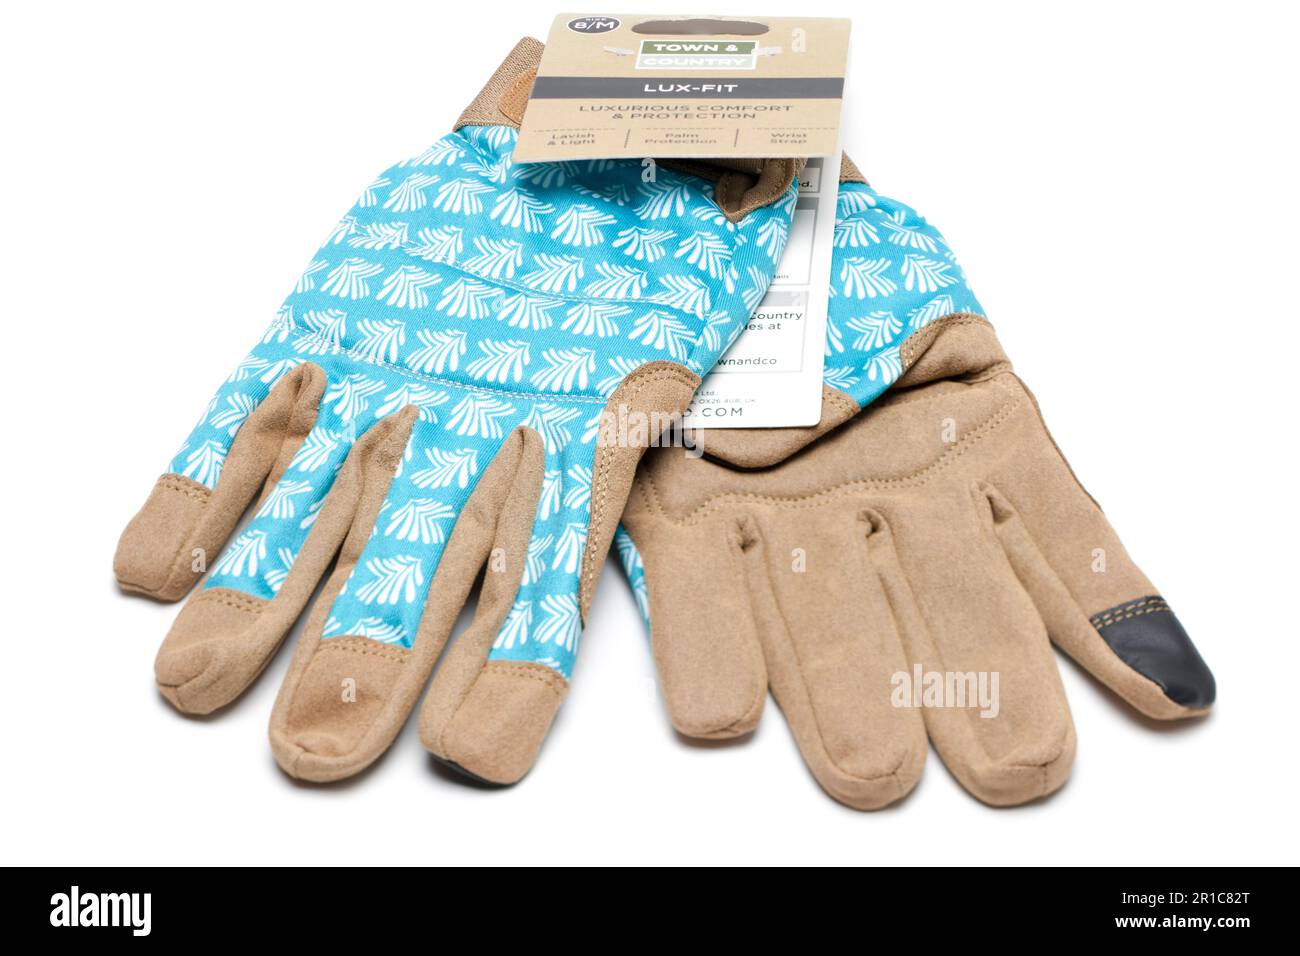 Town and Country Lux Fit Synthetic Leather Garden Gloves Stock Photo